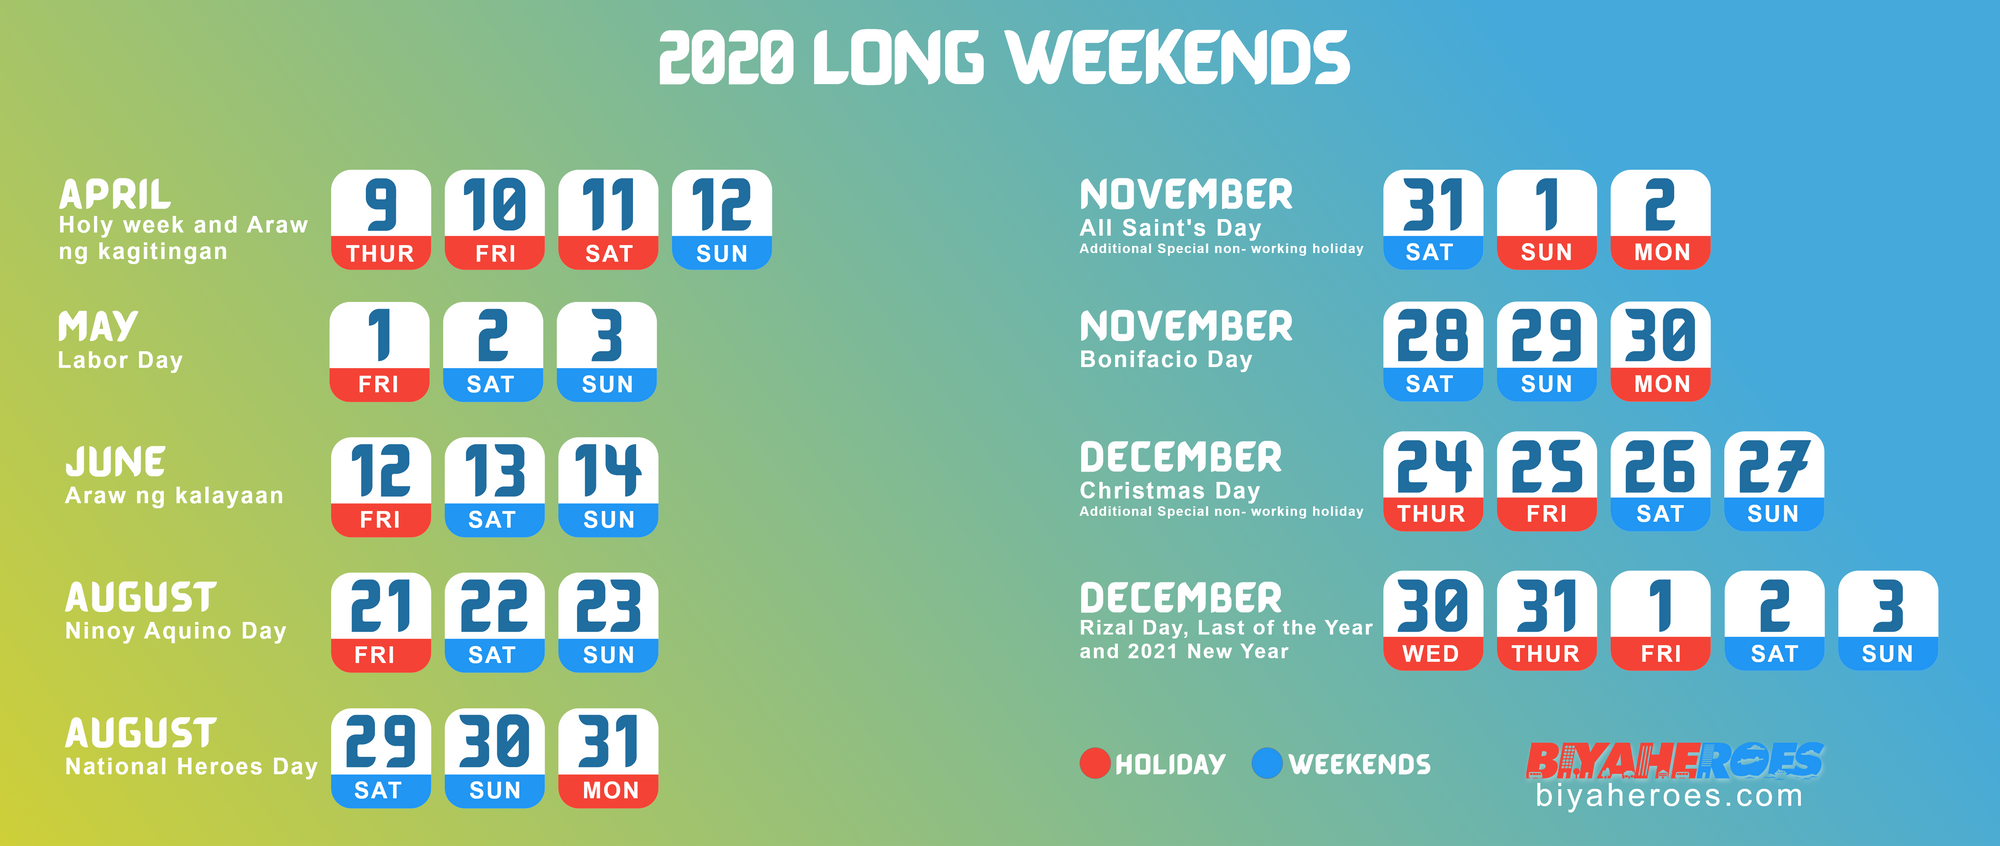 Travel Plan 2020: List of Holidays and Long weekends in the year 2020!